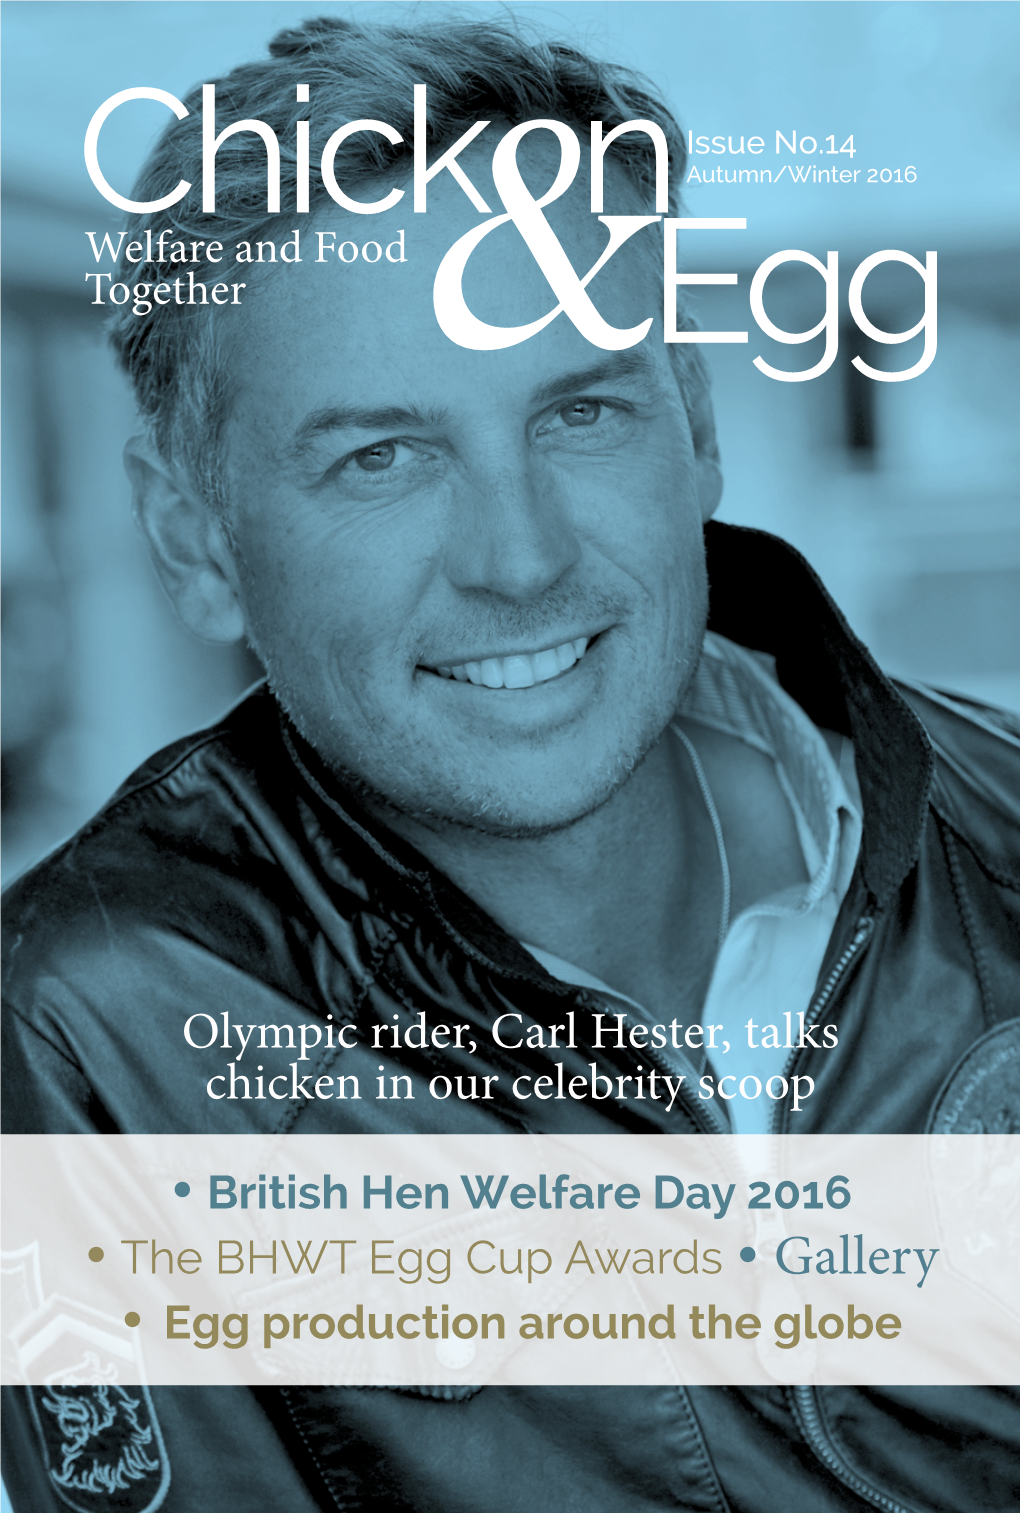 Olympic Rider, Carl Hester, Talks Chicken in Our Celebrity Scoop • British Hen Welfare Day 2016 • the BHWT Egg Cup Awards • Gallery • Egg Production Around the Globe